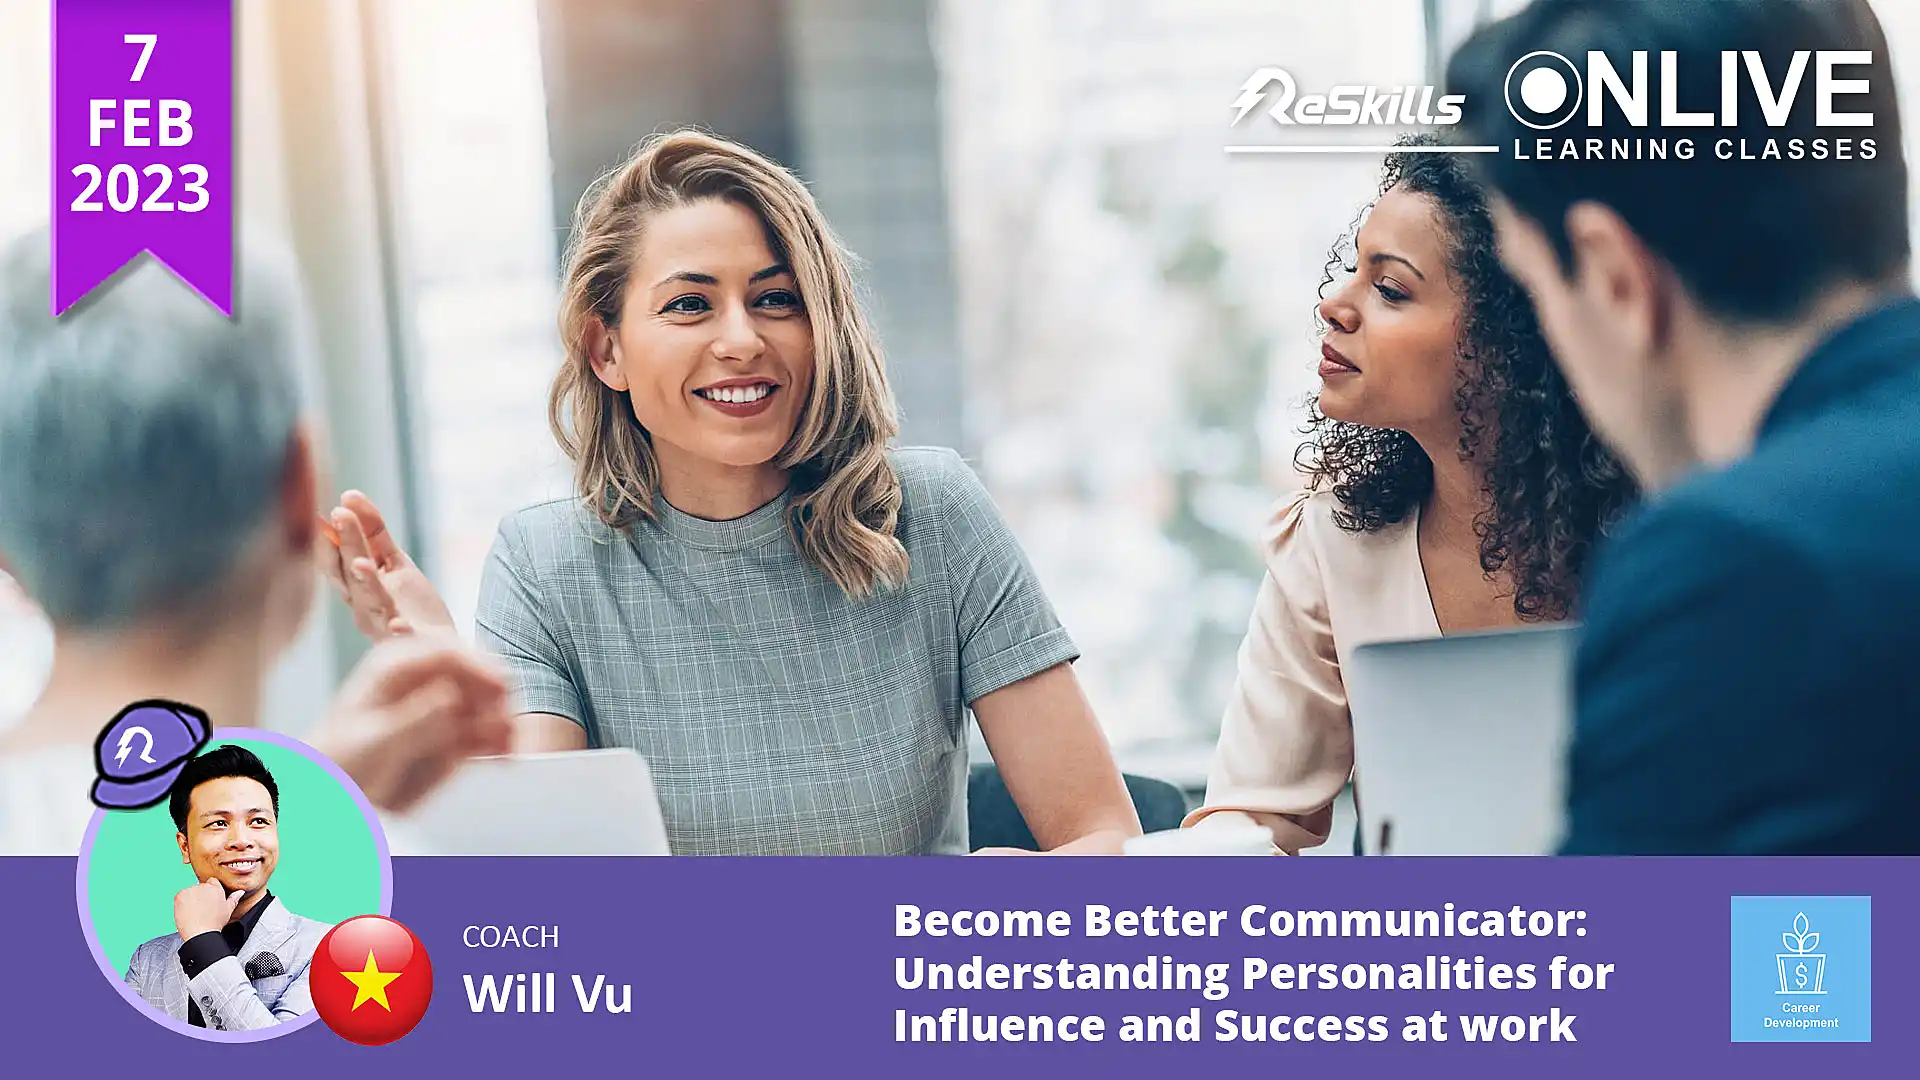 Become Better Communicator: Understanding Personalities for Influence and Success at Work. - ReSkills